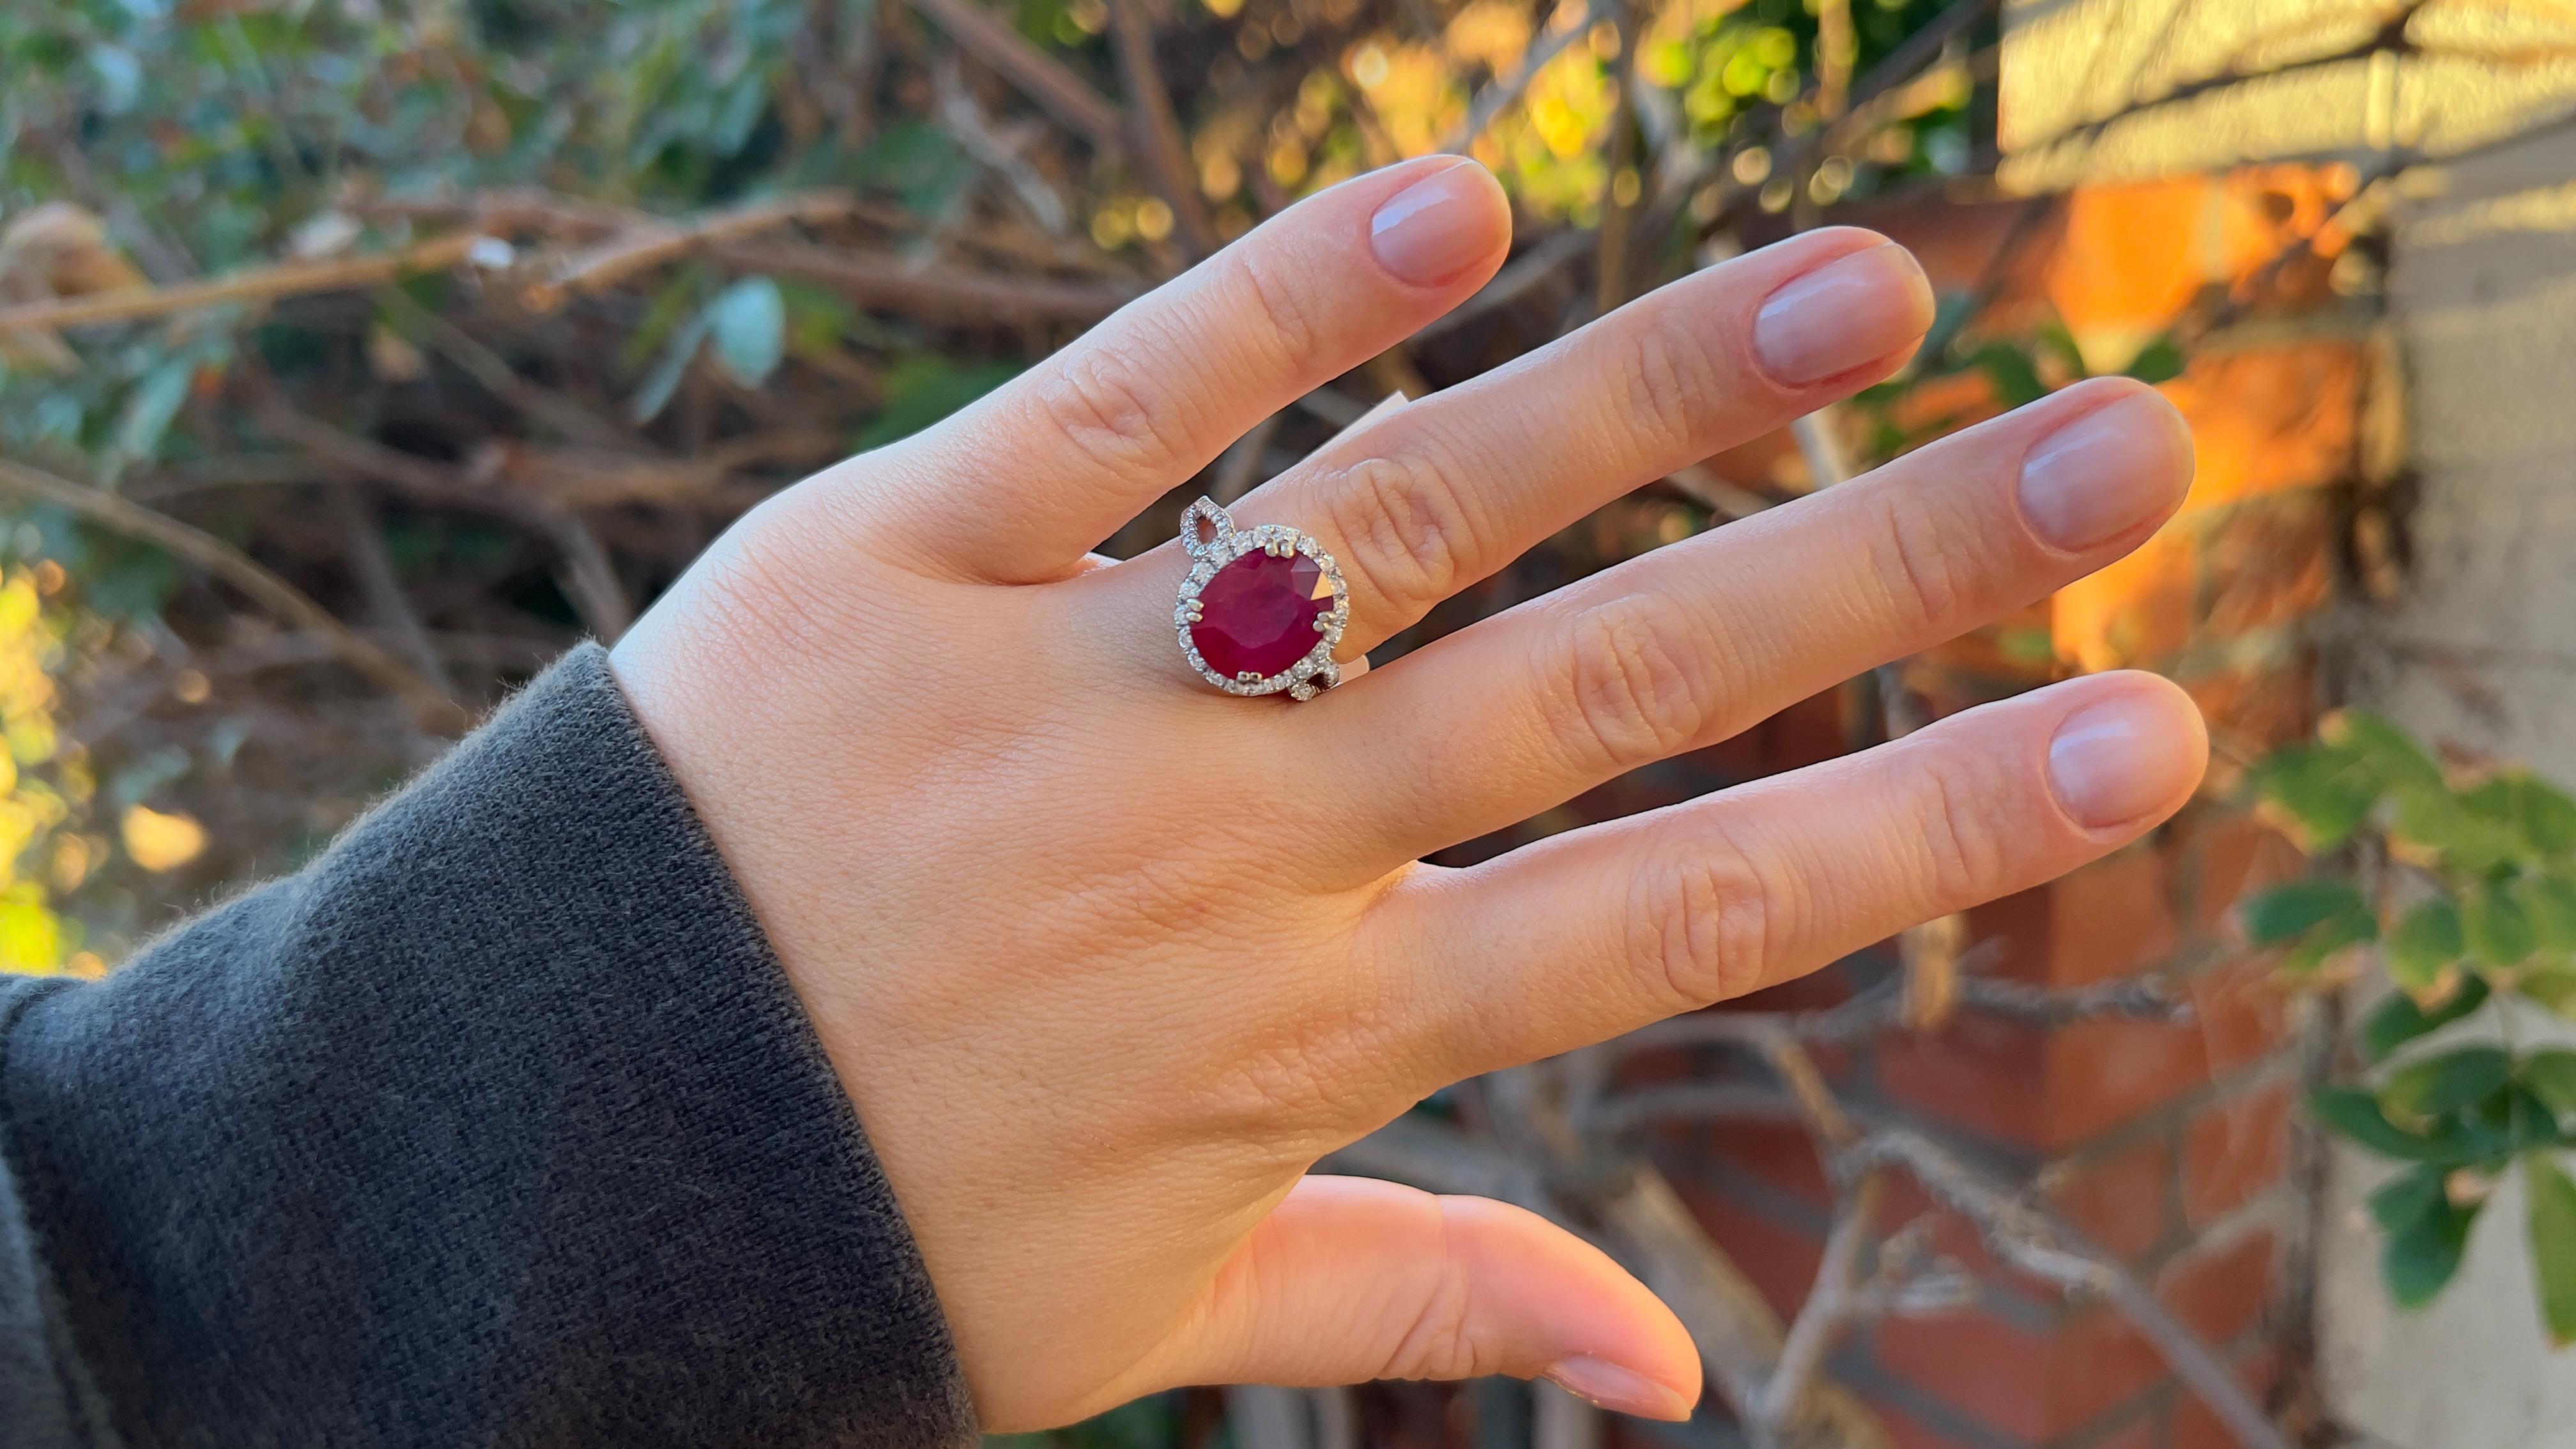 Ruby = 6.50 Carats
(Cut: Oval, Color: Red, Origin: Natural)
Diamond = 1.20 Carats
(Cut: Round; Color: F-G, Clarity: VS)
Metal = 18K White Gold
Ring Size = 6.5